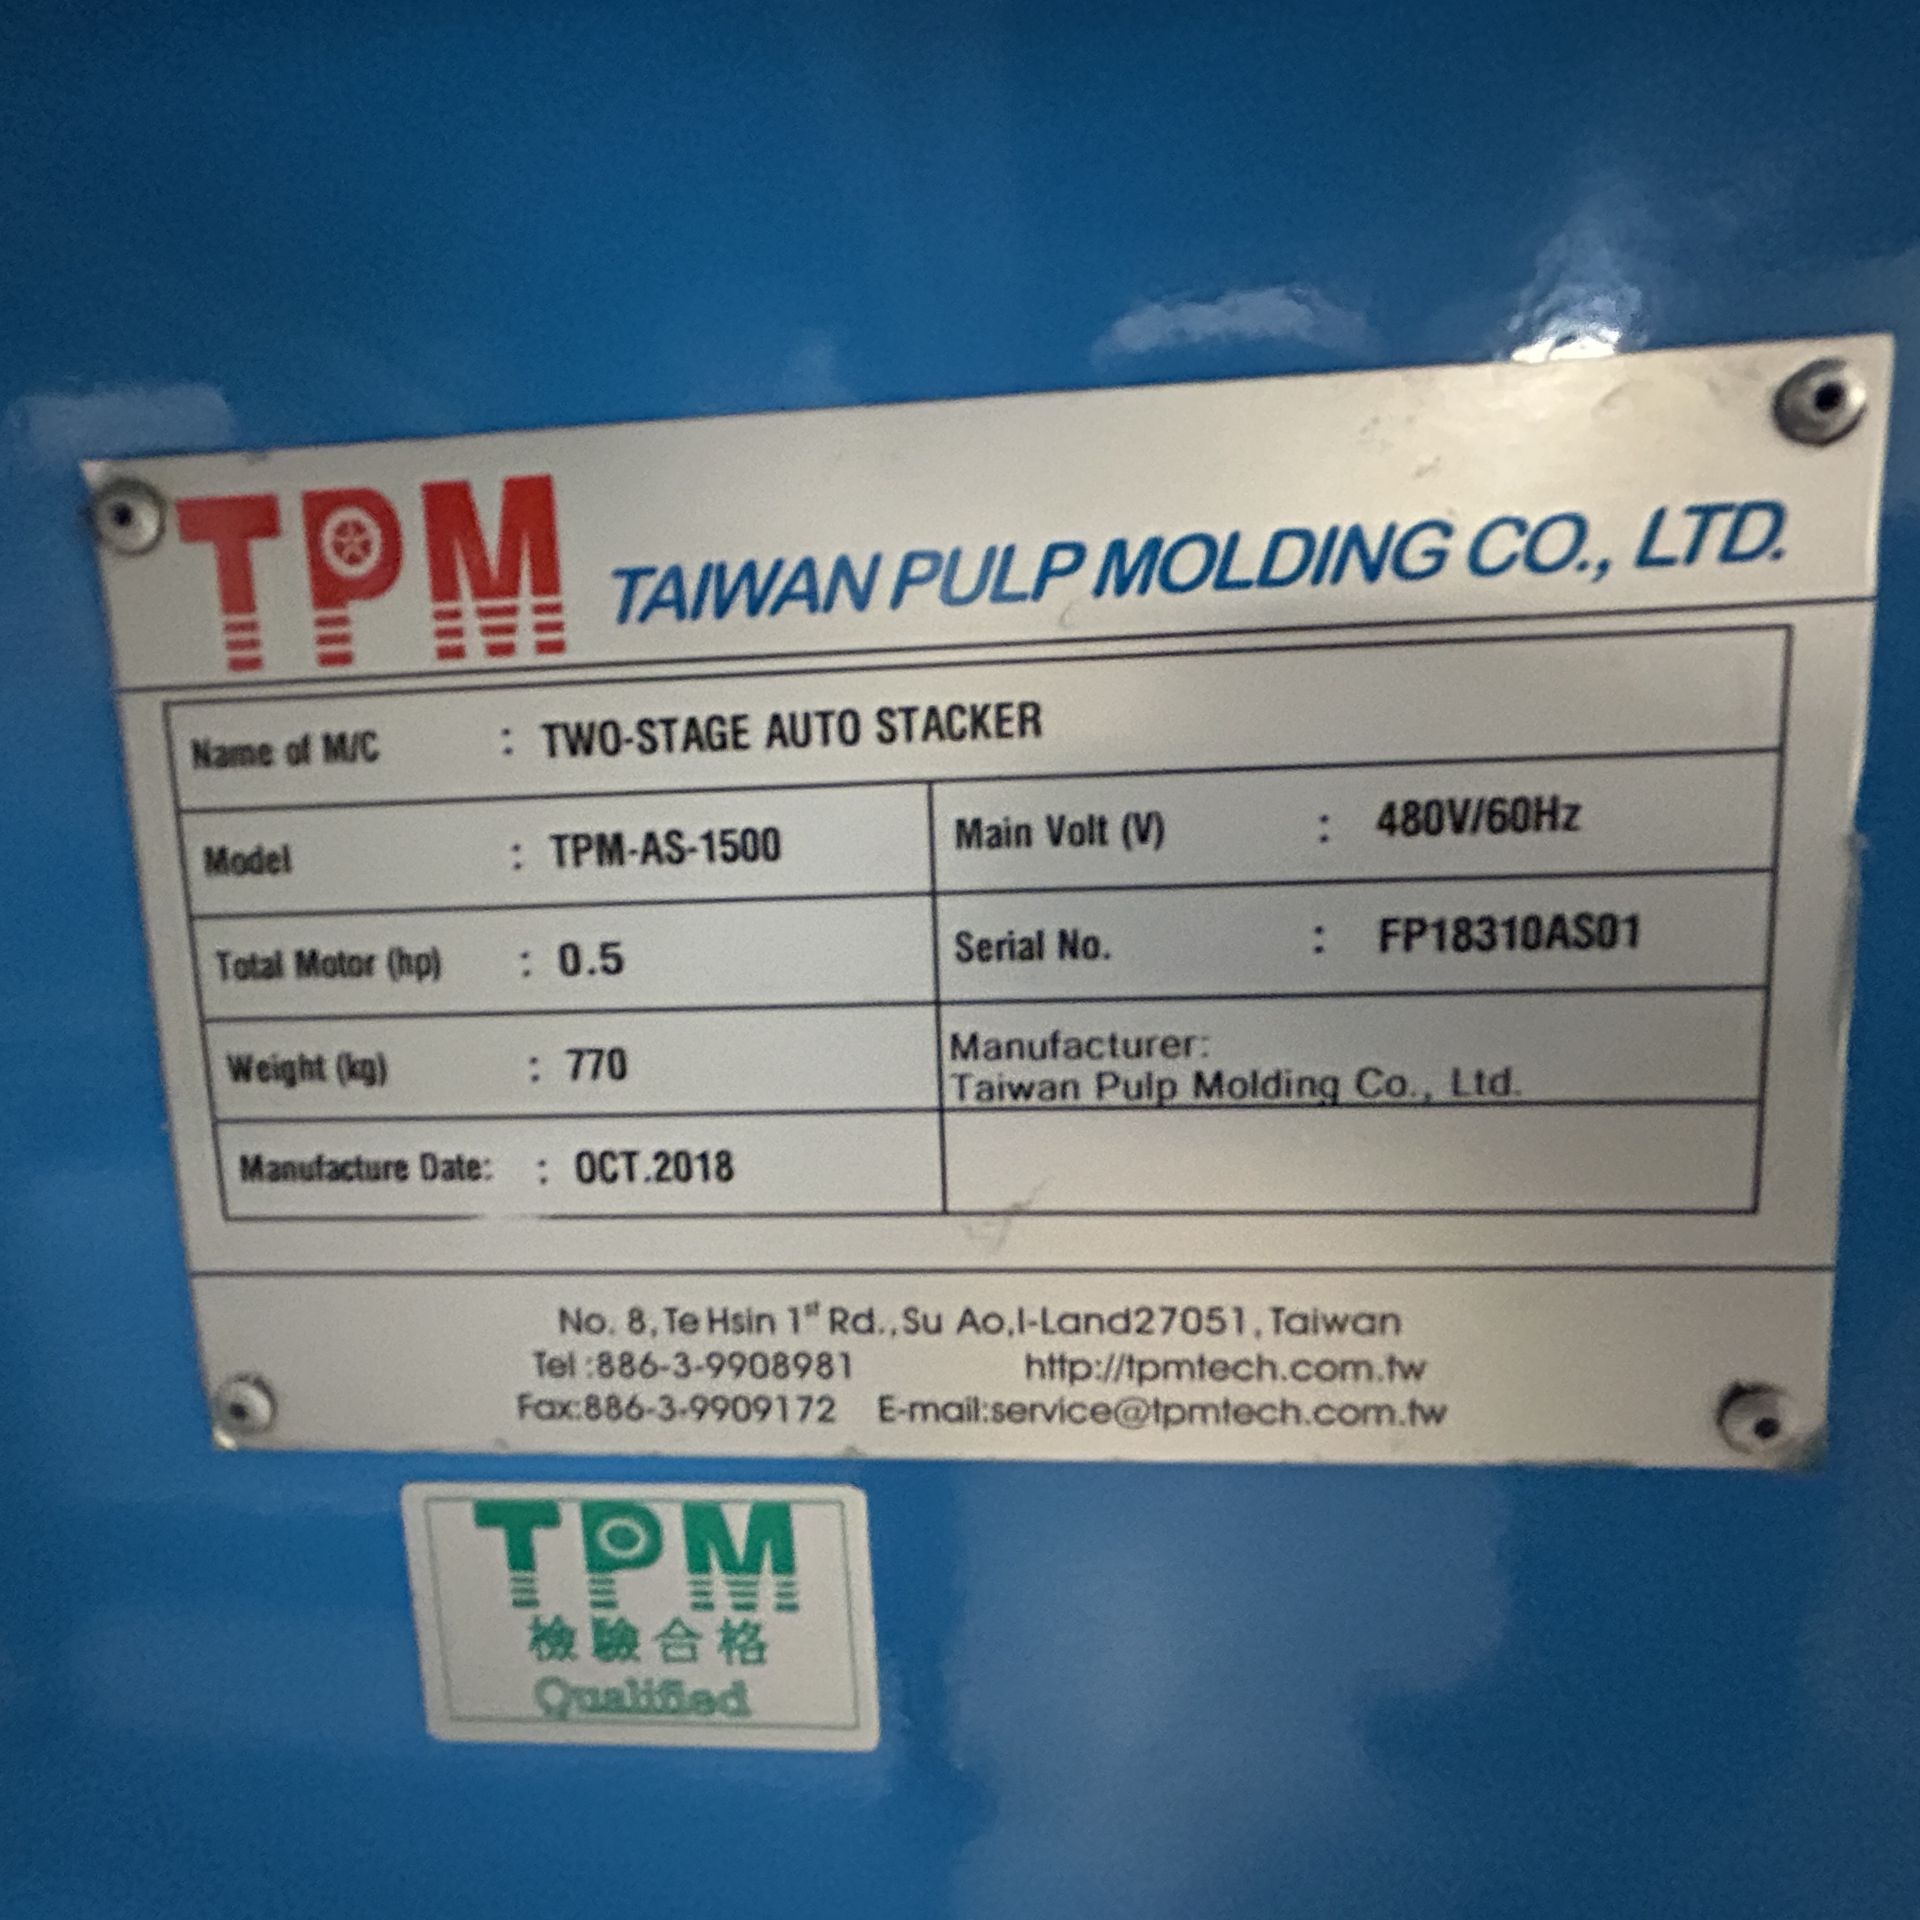 TPM-1500 3-Stage Pulp Thermoforming Machine Equipped With (1) 2018 TPM-AS-1500 2-Stage Auto Stacker - Image 28 of 35